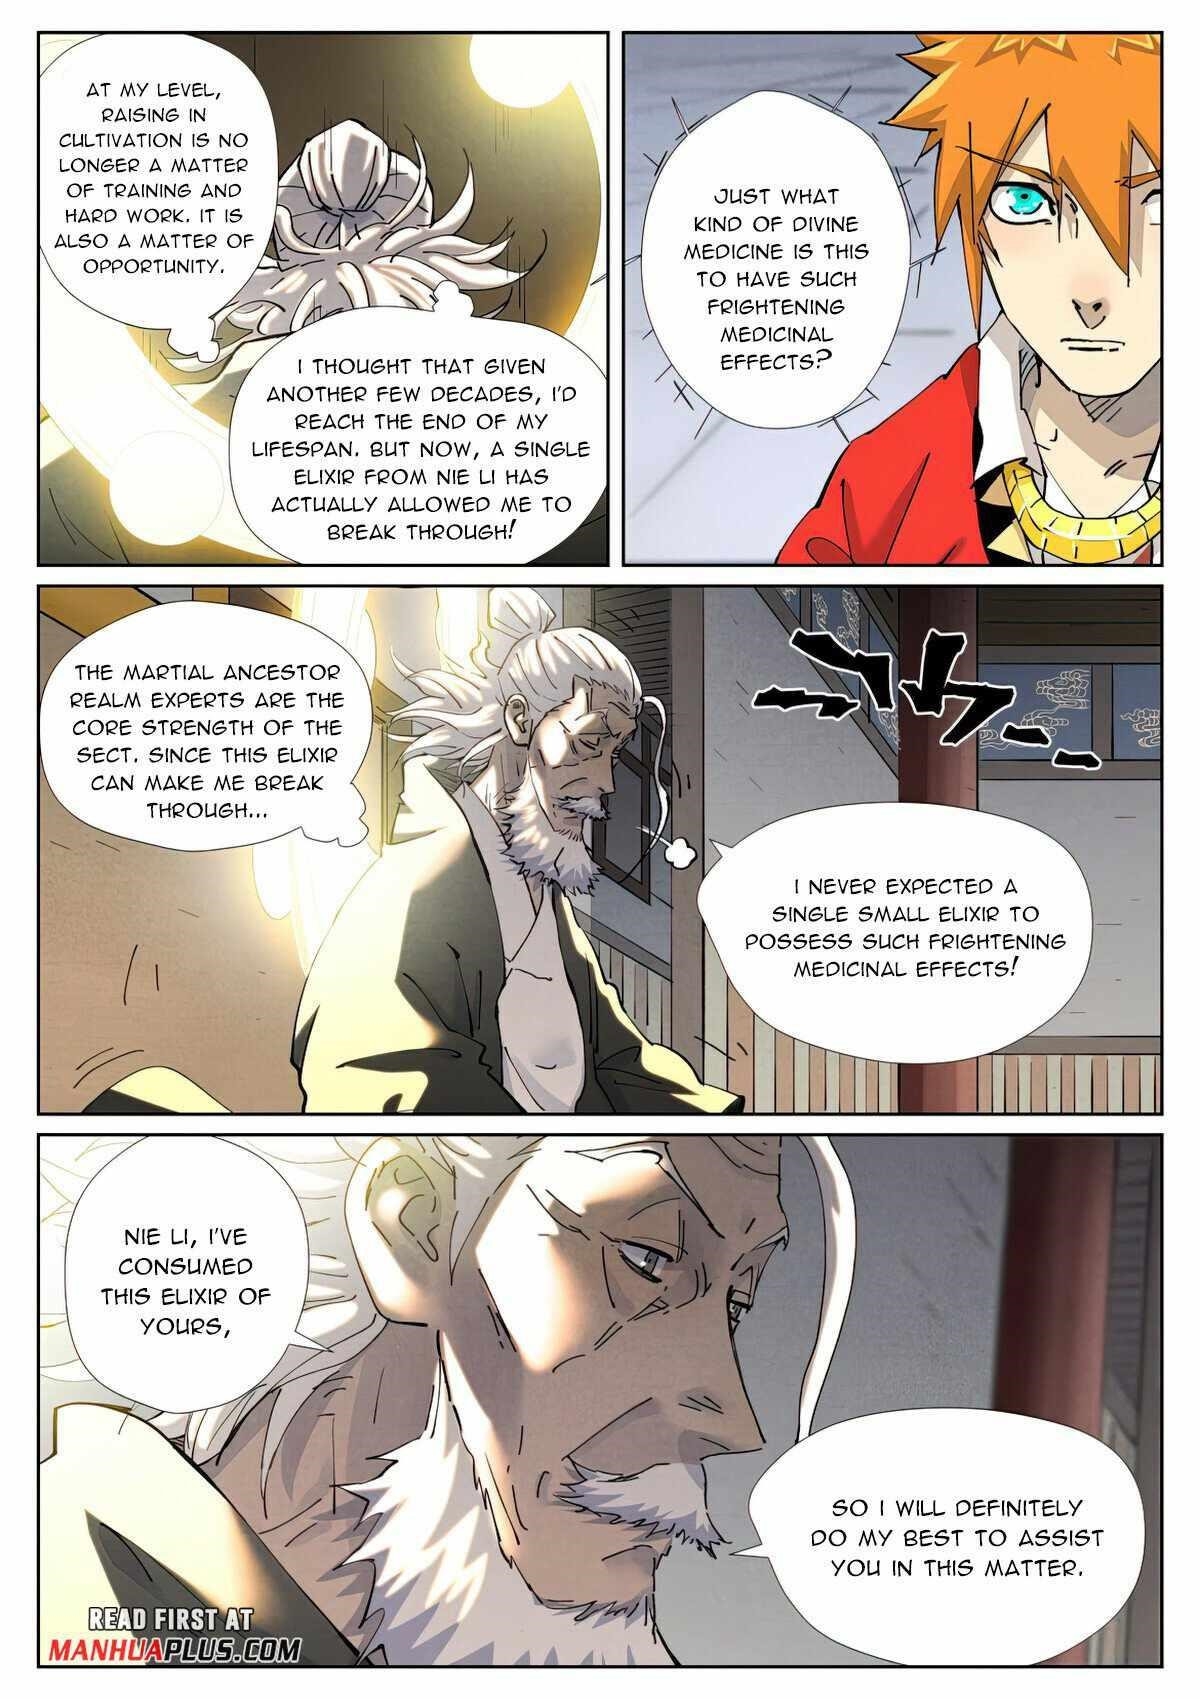 Read Tales of Demons and Gods Chapter 211.5 on Reaper Scans